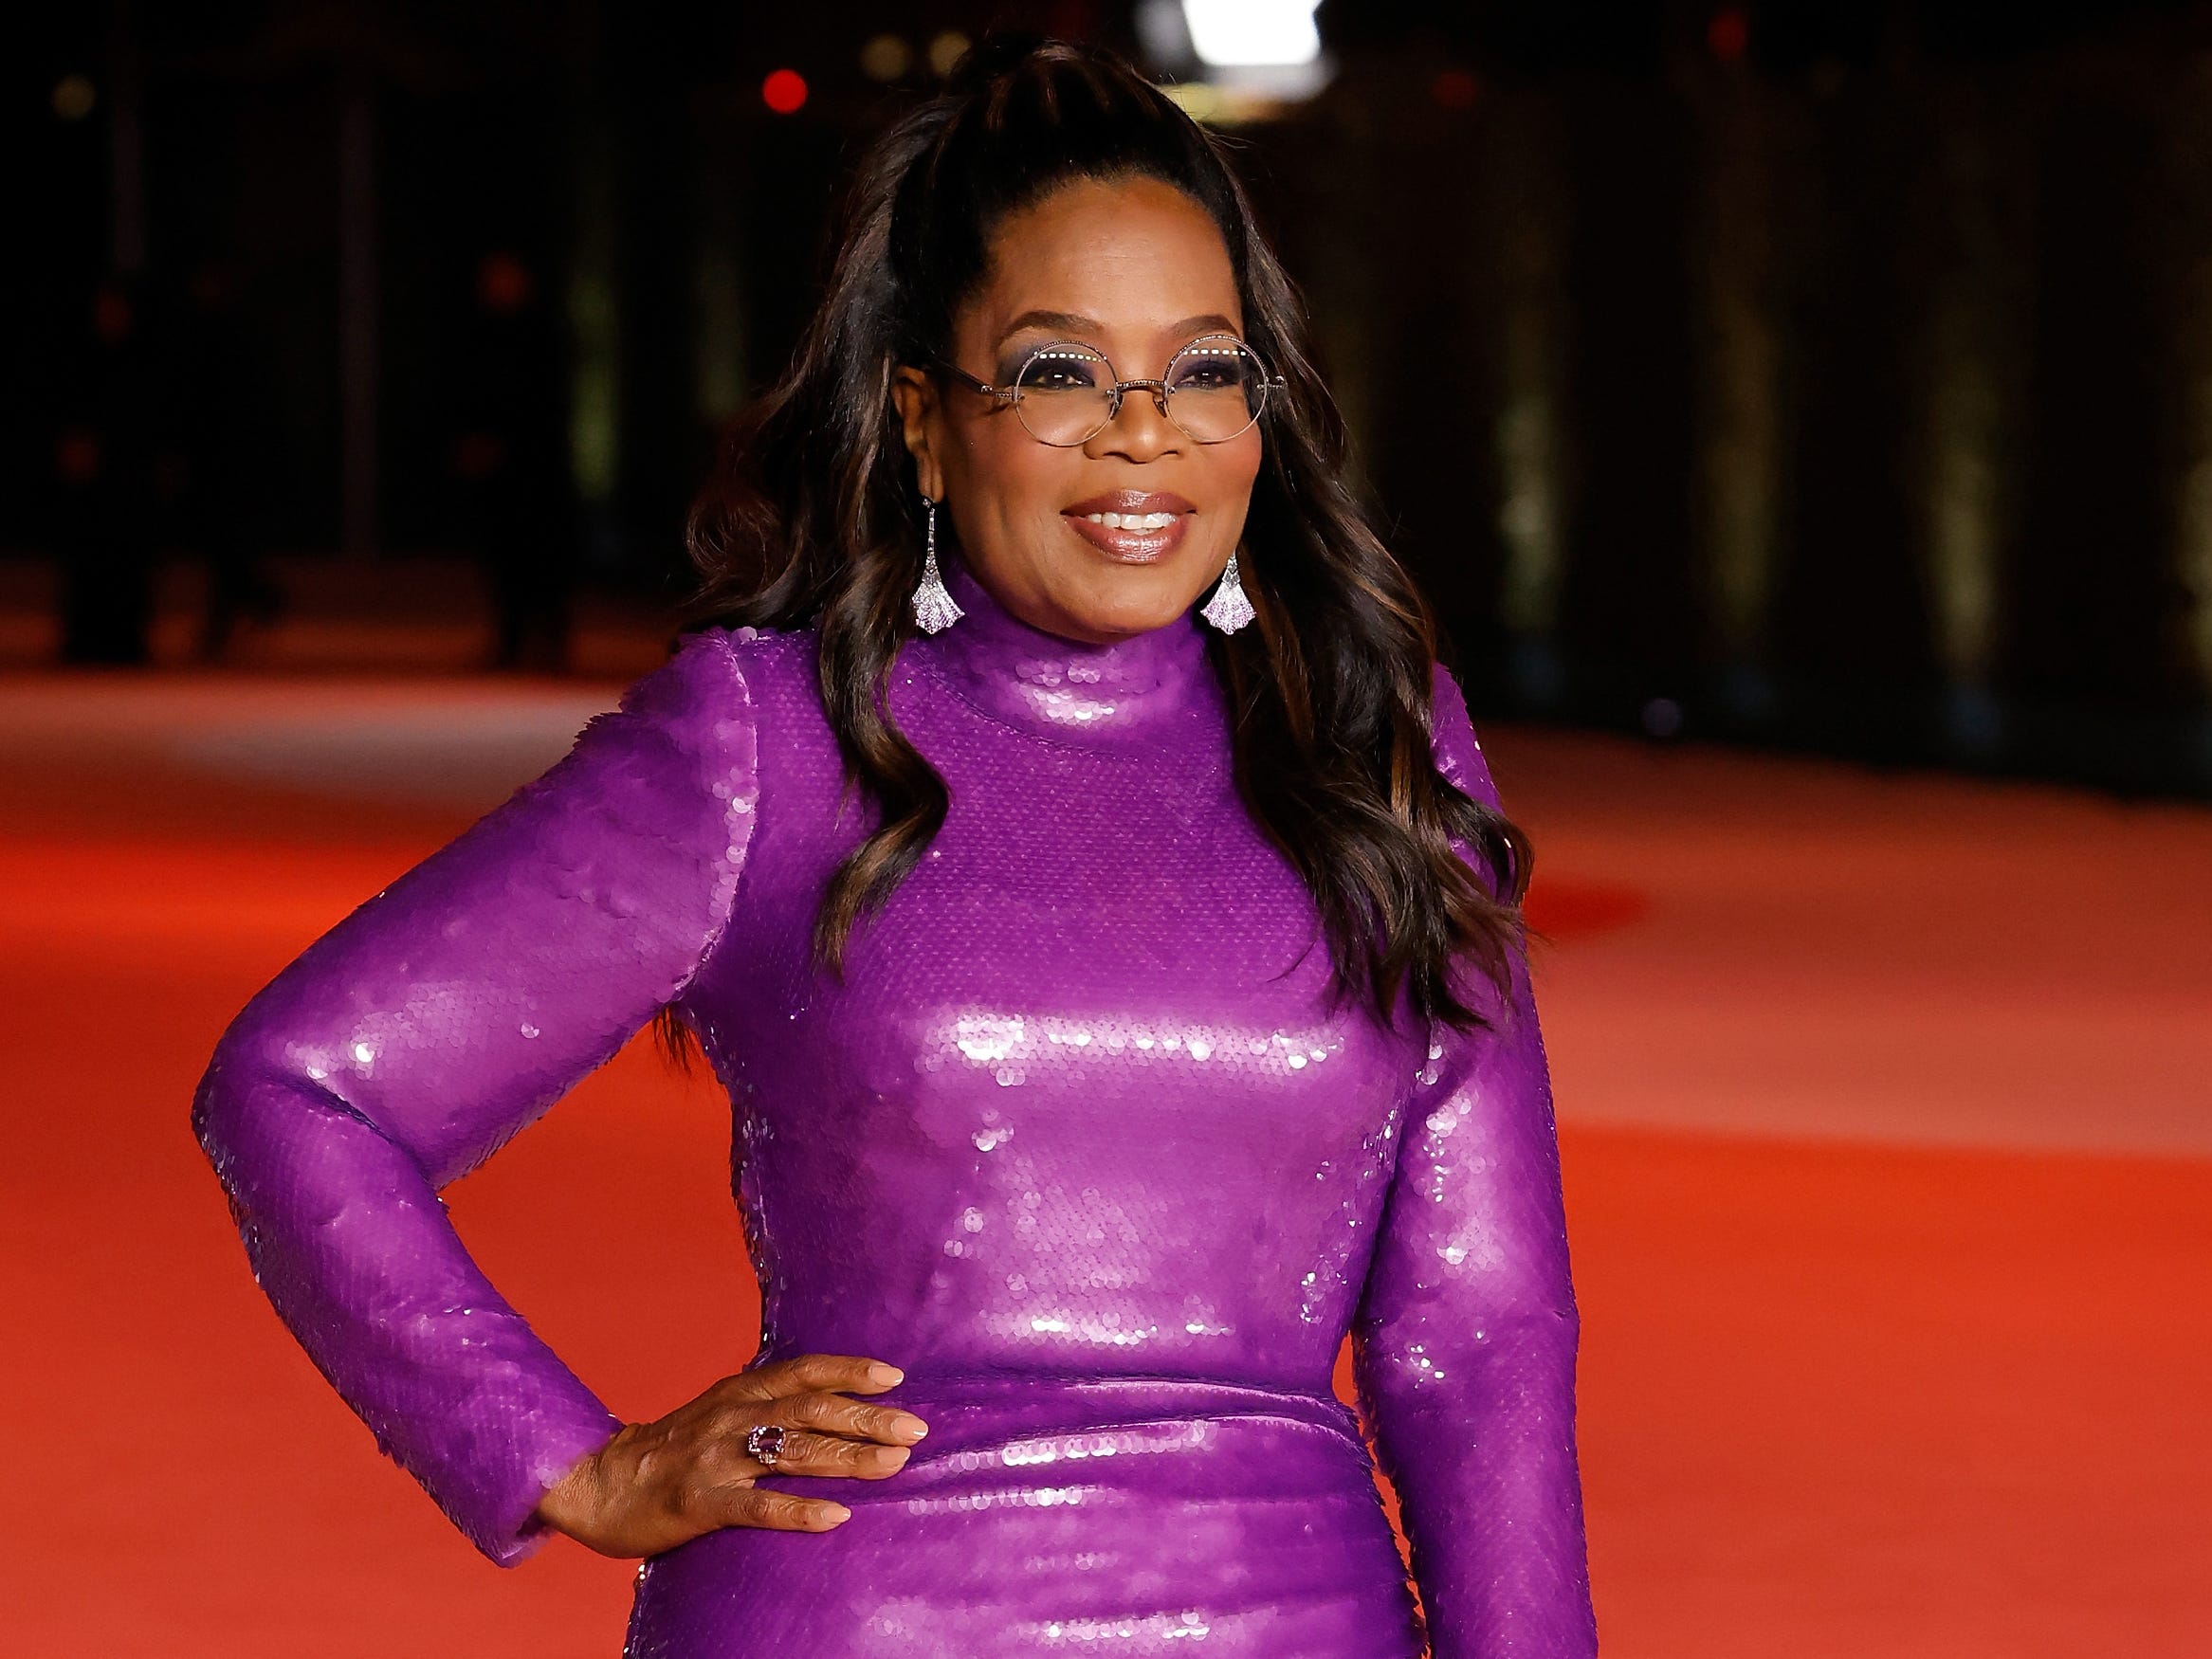 <p>Winfrey also spoke to the graduating class of Harvard University about how God has guided her throughout her life, and the importance of listening.</p><p>"Life is always talking to us," she said in her speech. "When you tap into what it's trying to tell you, when you can get yourself quiet enough to listen — really listen — you can begin to distill the still, small voice, which is always representing the truth of you, from the noise of the world. You can start to recognize when it comes your way. You can learn to make distinctions, to connect, to dig a little deeper. You'll be able to find your own voice within the still, small voice—you'll begin to know your own heart and figure out what matters most when you can listen to the still, small voice. Every right move I've made has come from listening deeply and following that still, small voice, aligning myself with its power."</p><p>Winfrey also discussed avoiding imposter syndrome, tapping into who you are, and treating others with integrity. </p><p>"We also need generosity of spirit; we need high standards and open minds and untamed imagination," she continued. "That's how you make a difference in the world. Using who you are and what you stand for to make changes big and small."</p>